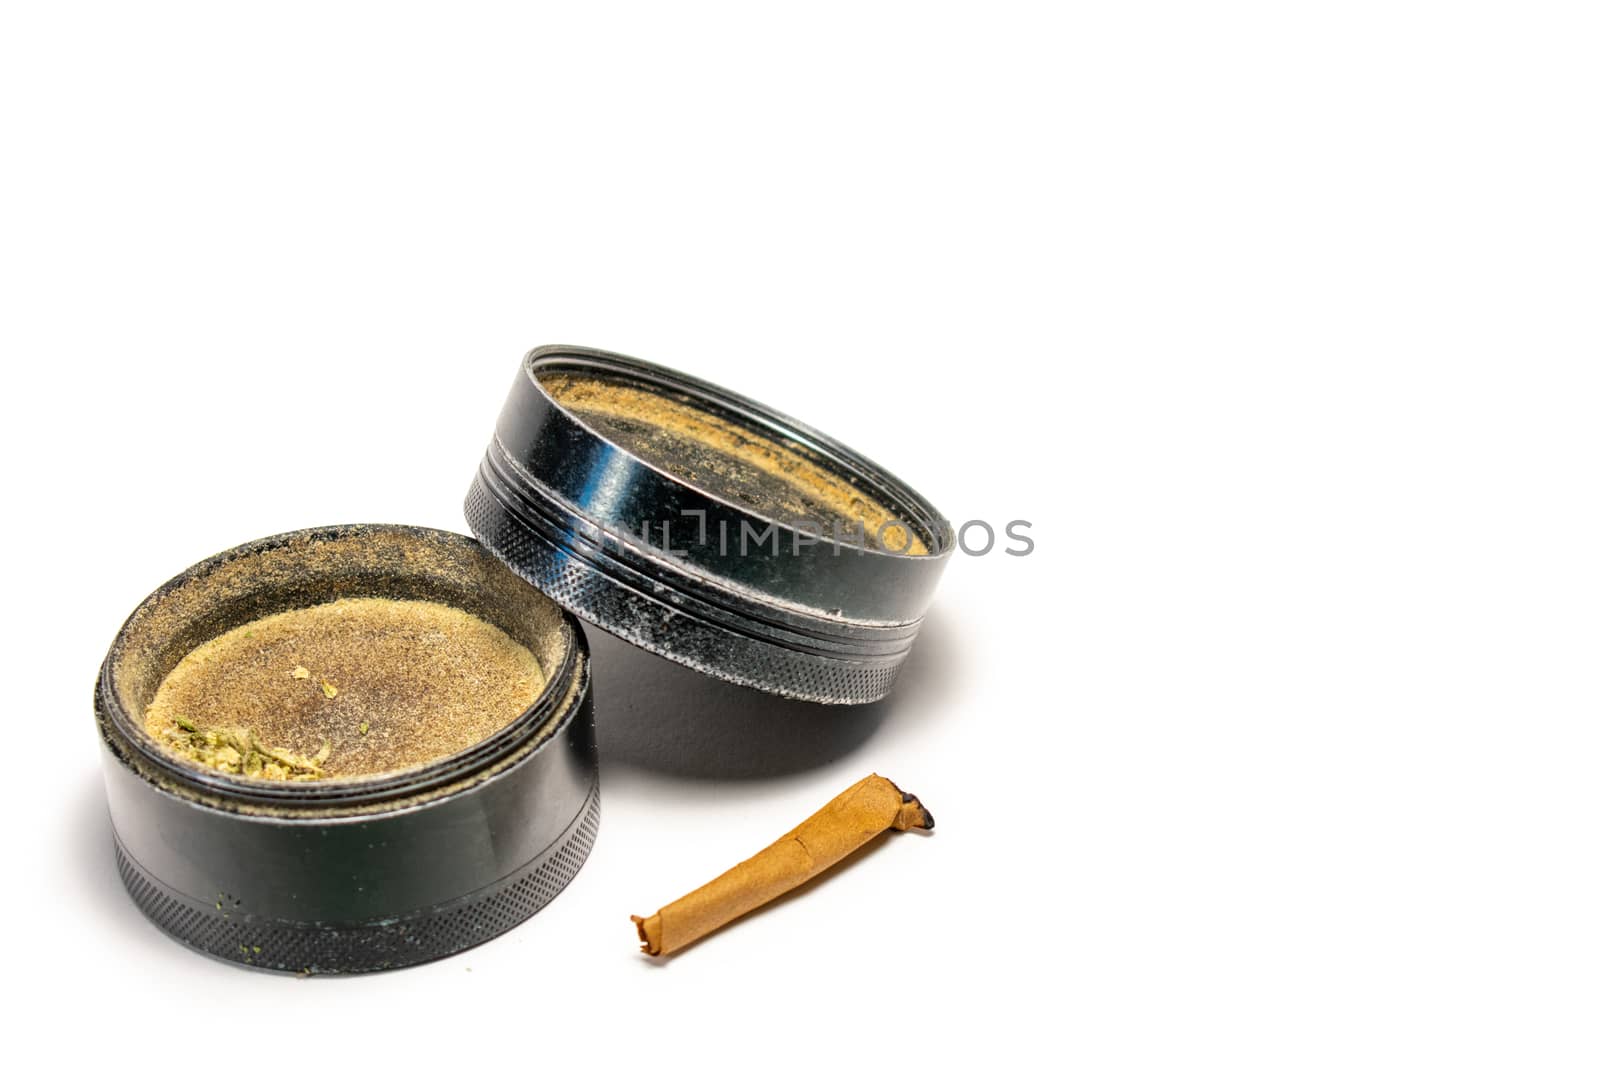 A Black Cannabis Grinder With the Lid Leaning On the Side With the End of a Smoked Cannabis Cigar